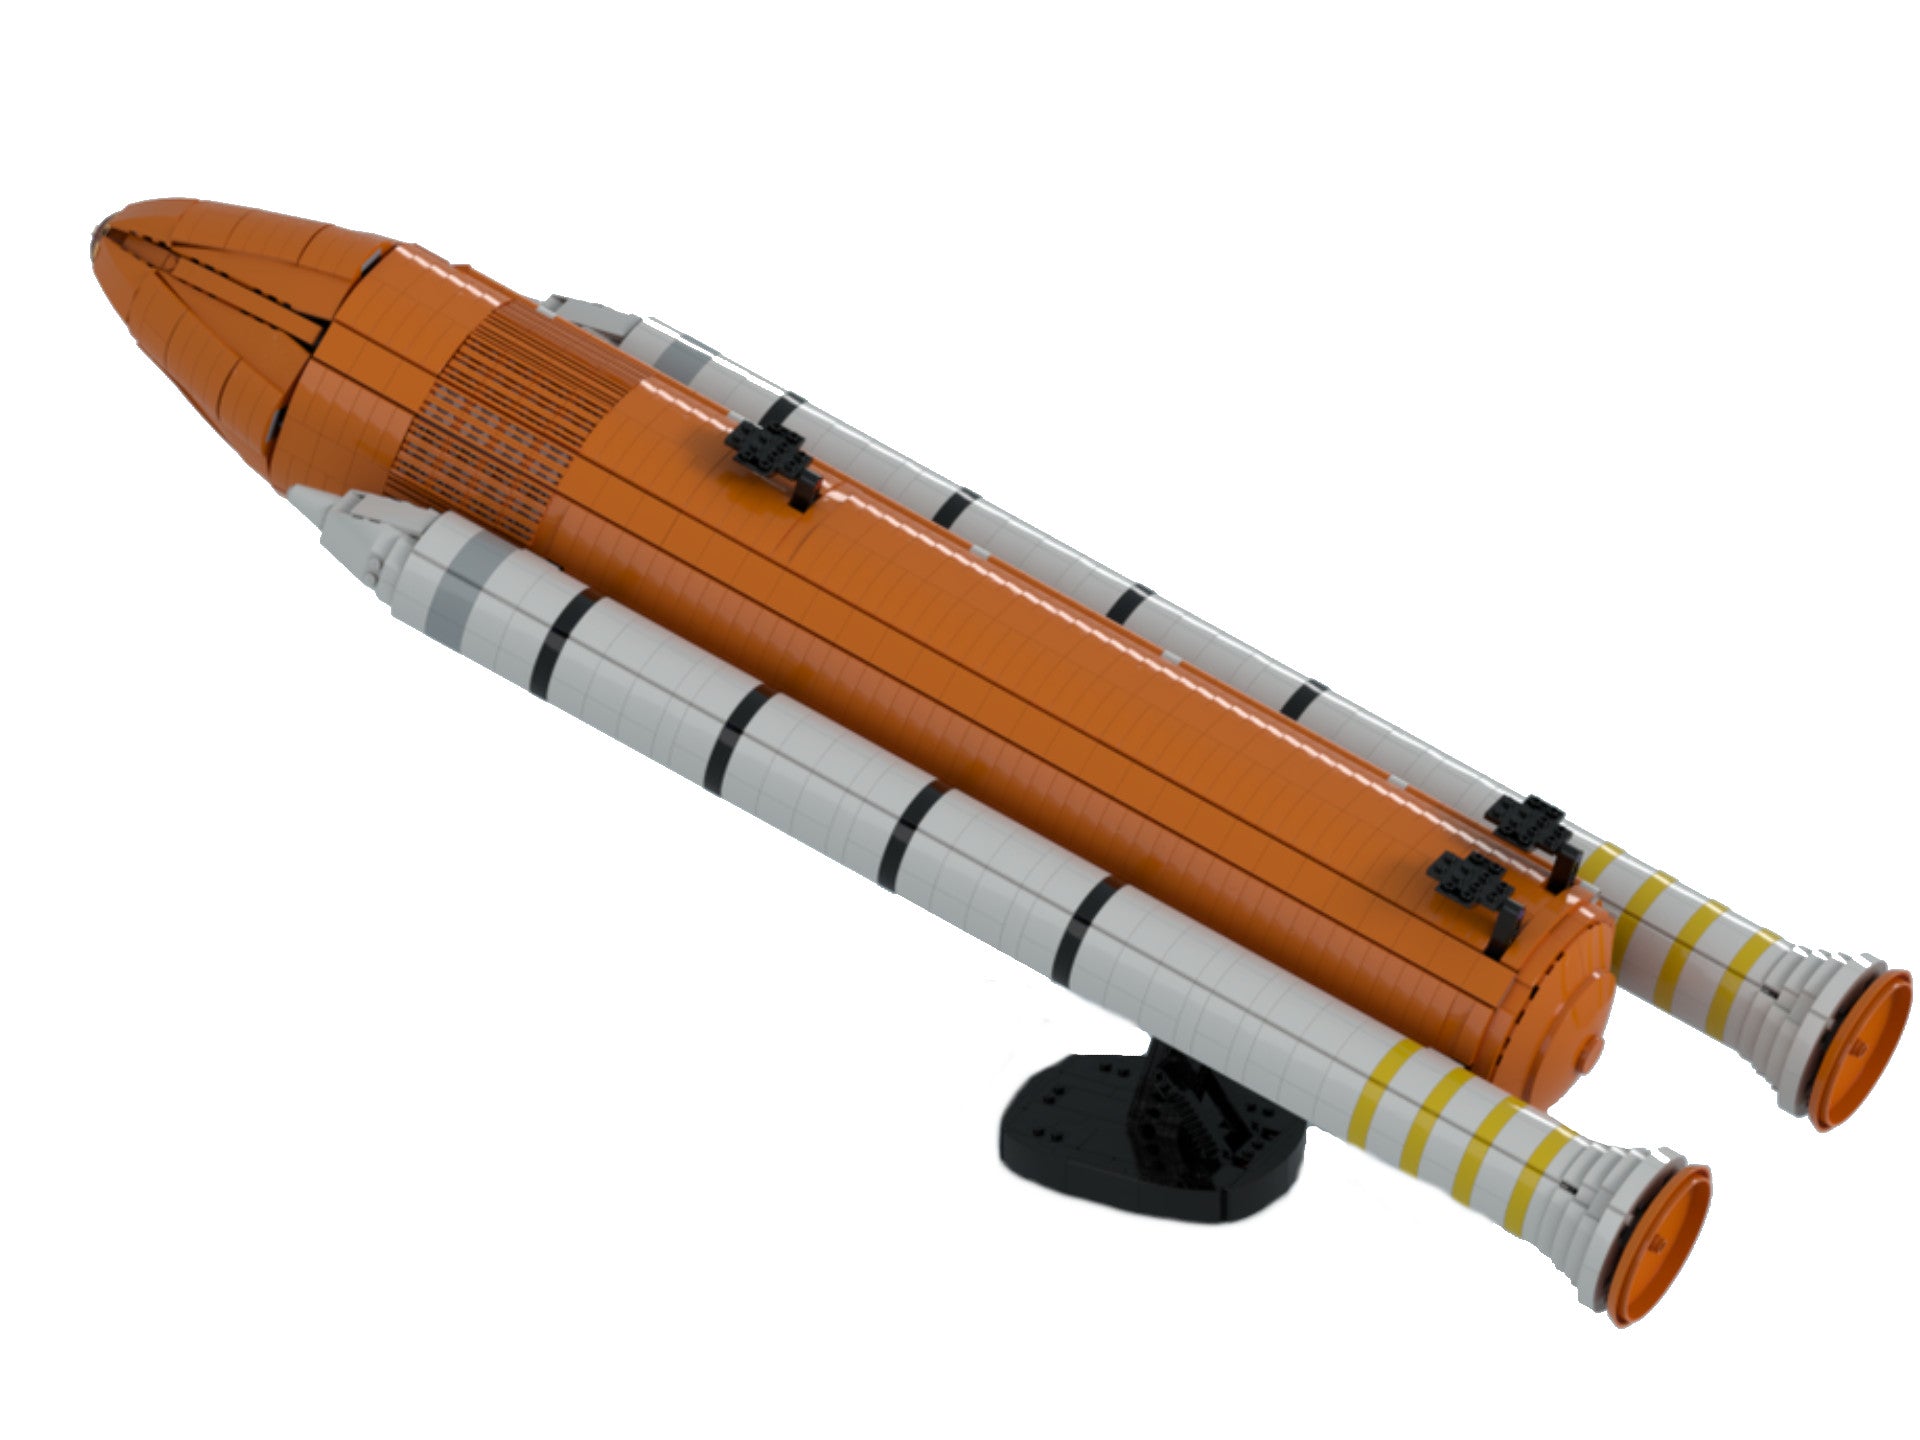 NG_Design's Tank Boosters – On The Brick